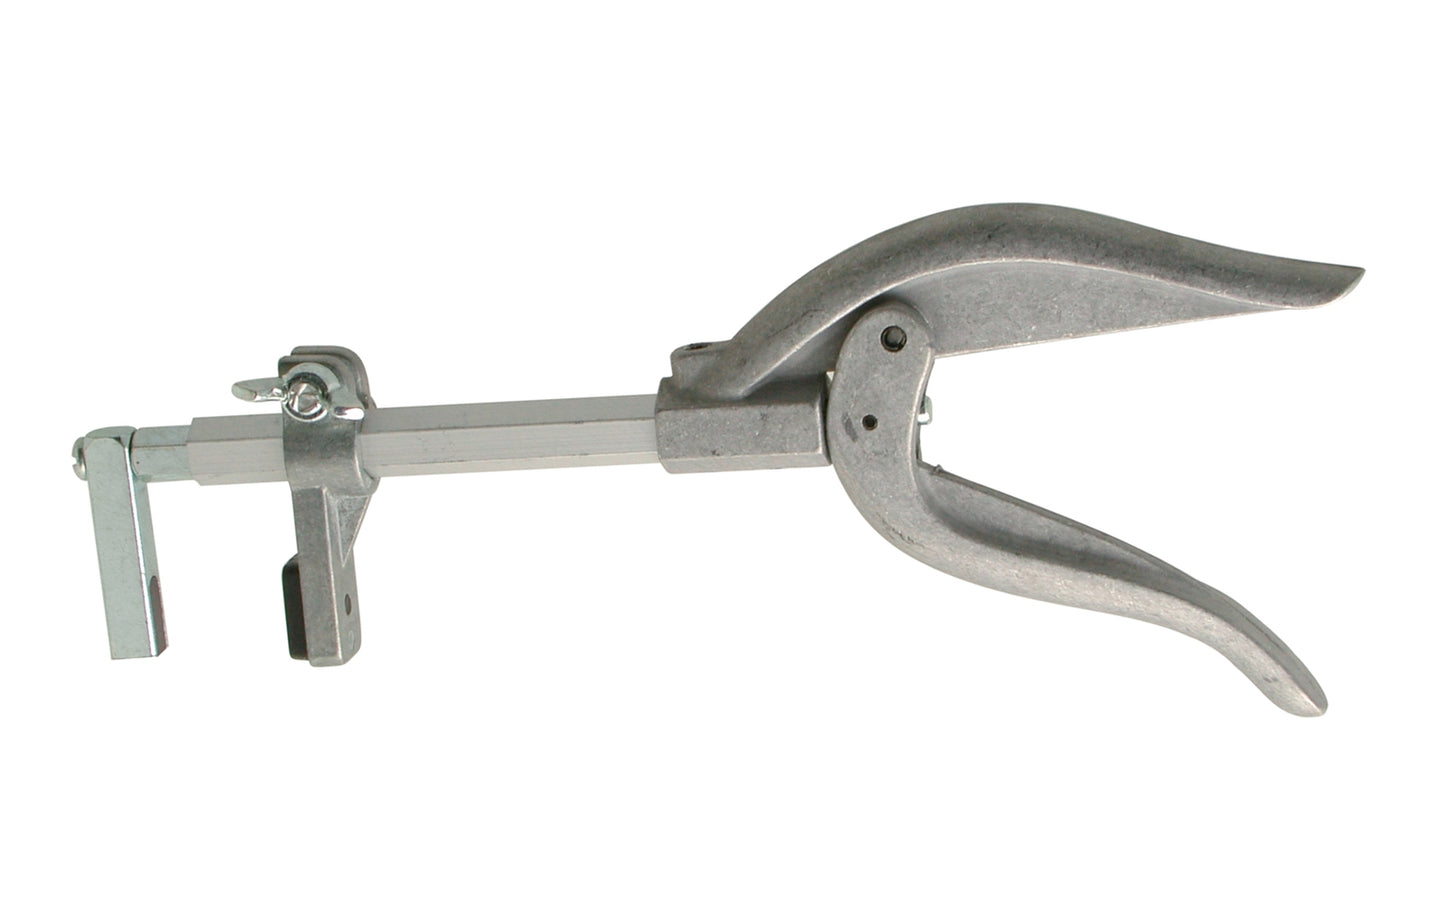 This Picture Frame Plier helps install nails on the backs of picture frames. Position the nail where it is needed, and squeeze it in place with this handy tool.